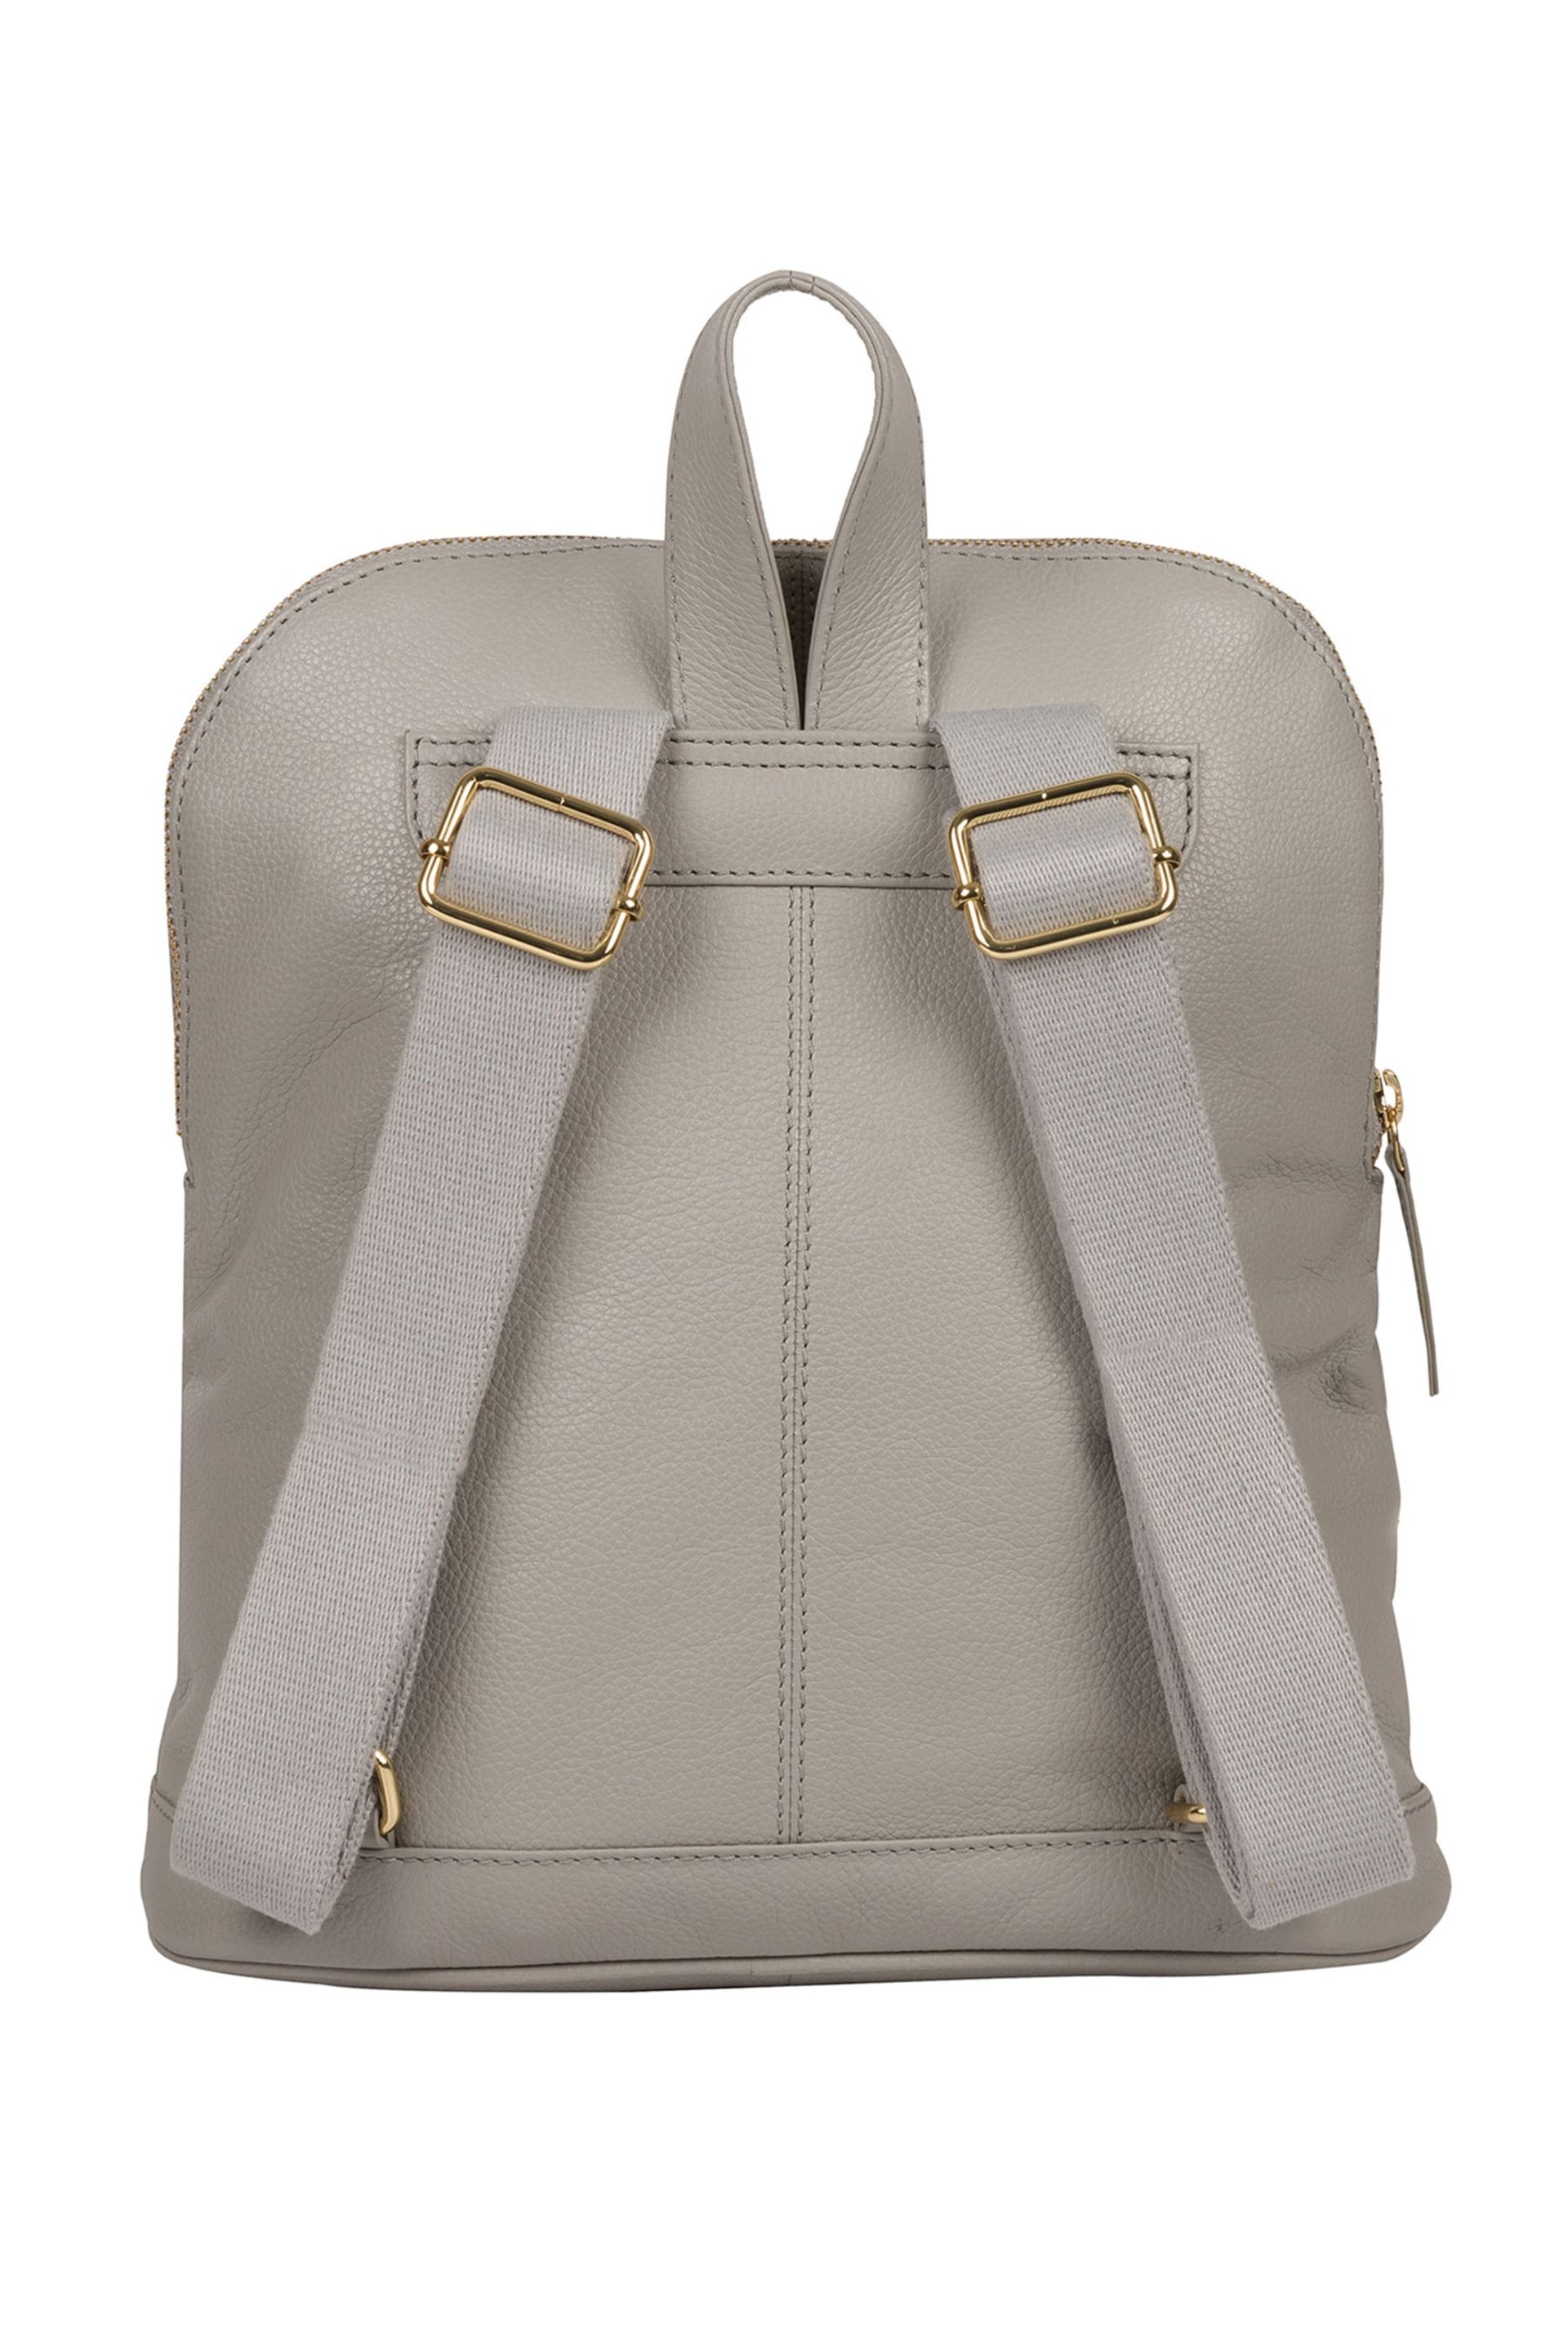 Pure Luxuries London Kinsely Leather Backpack - Image 3 of 5